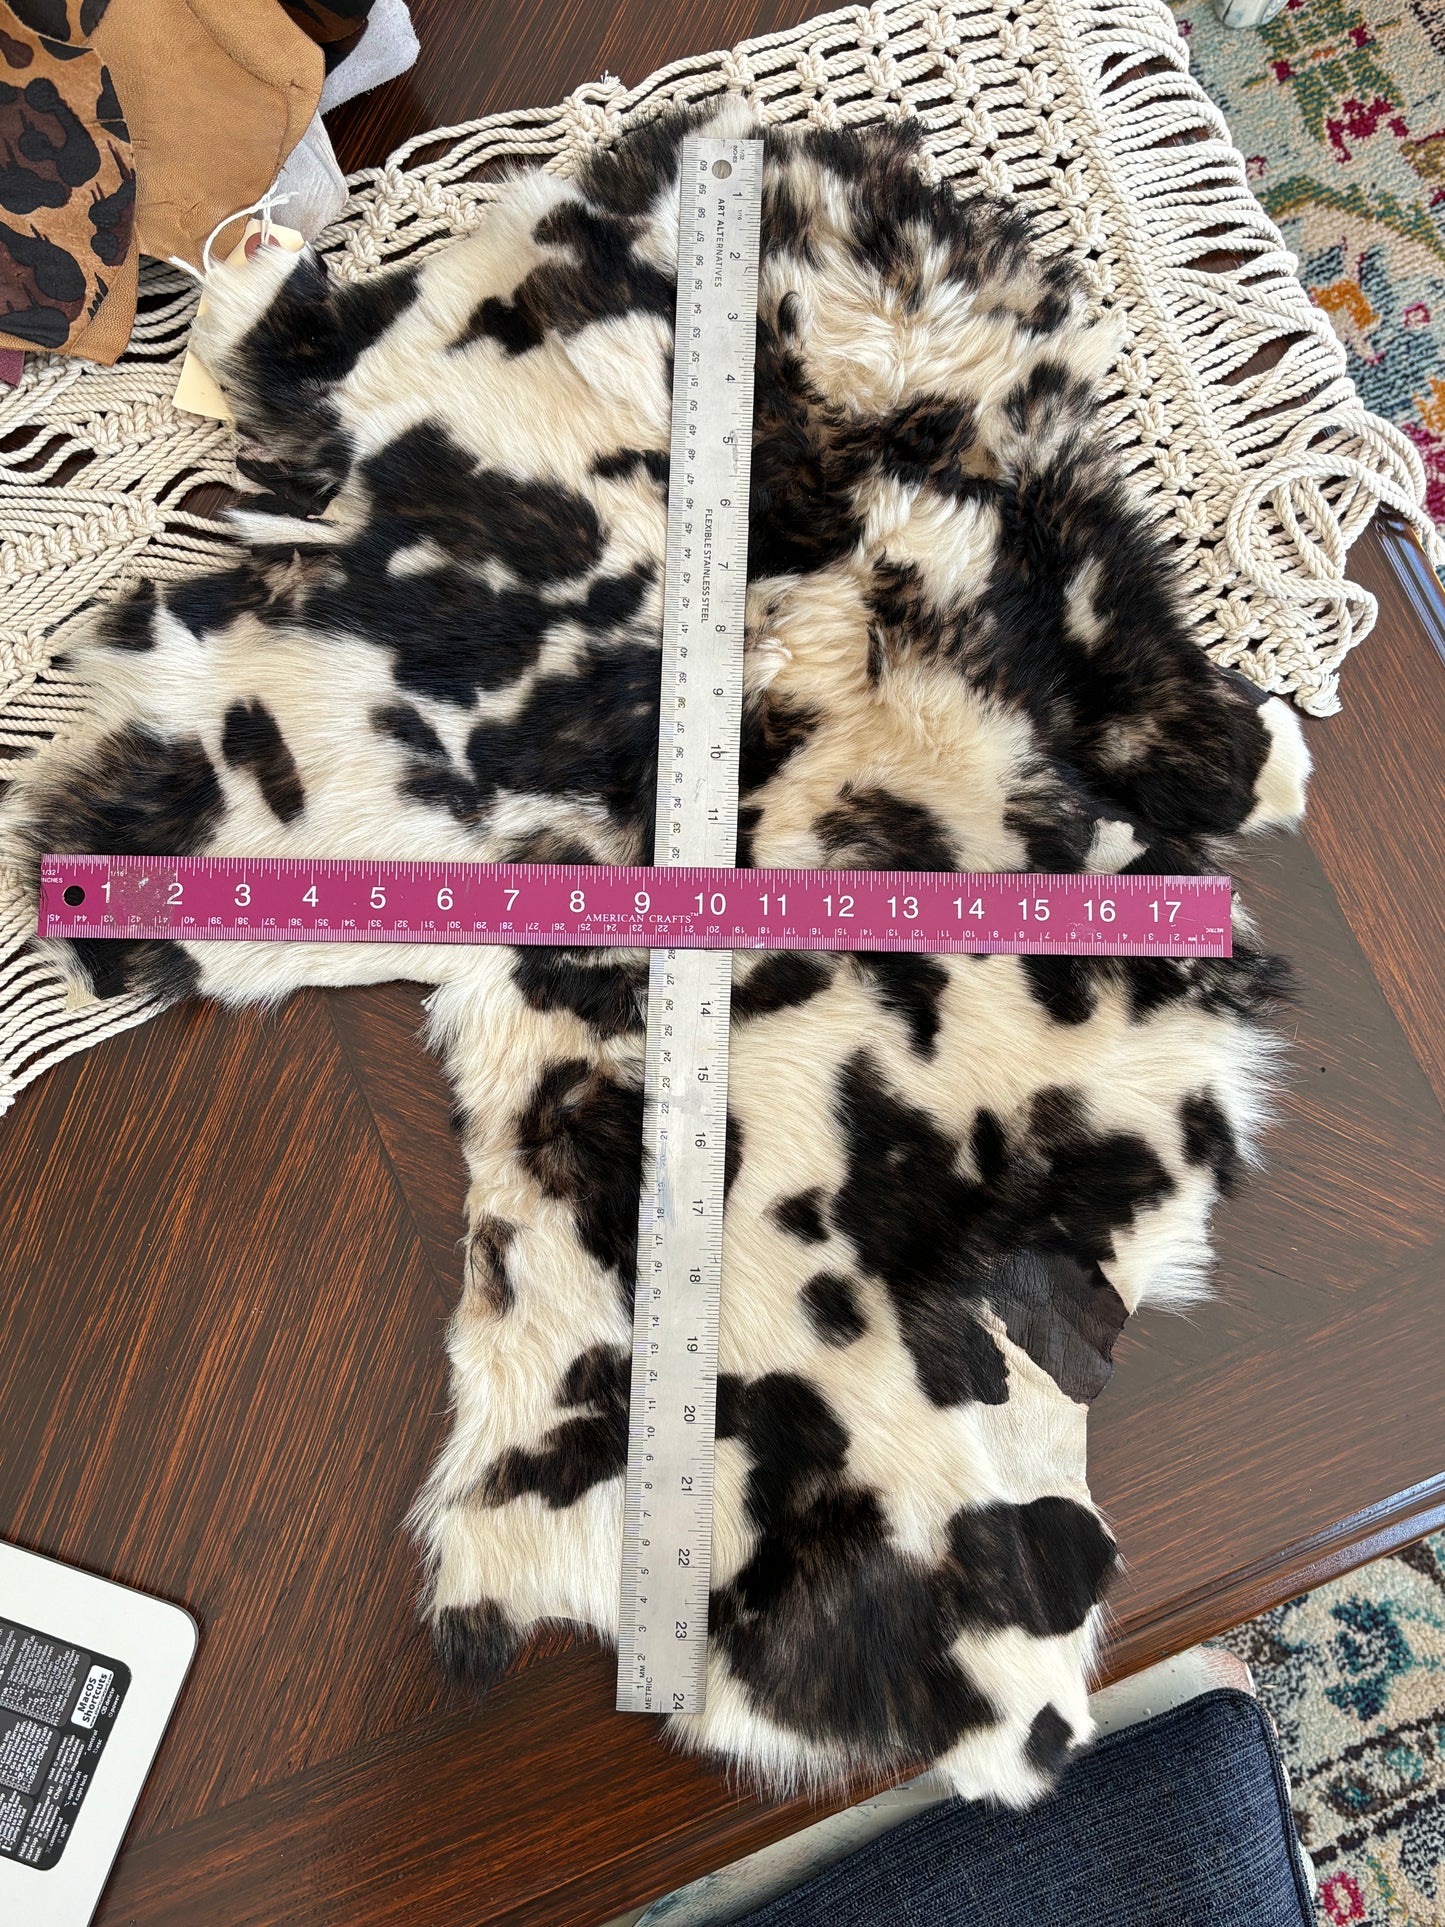 LISTING 3, Shearling Merino Sheep Pelt, Sheepskin, Upholstery, Woolly, Leather Suede, Upcycling, DIY Projects Choose Color, Genuine Hide Fur